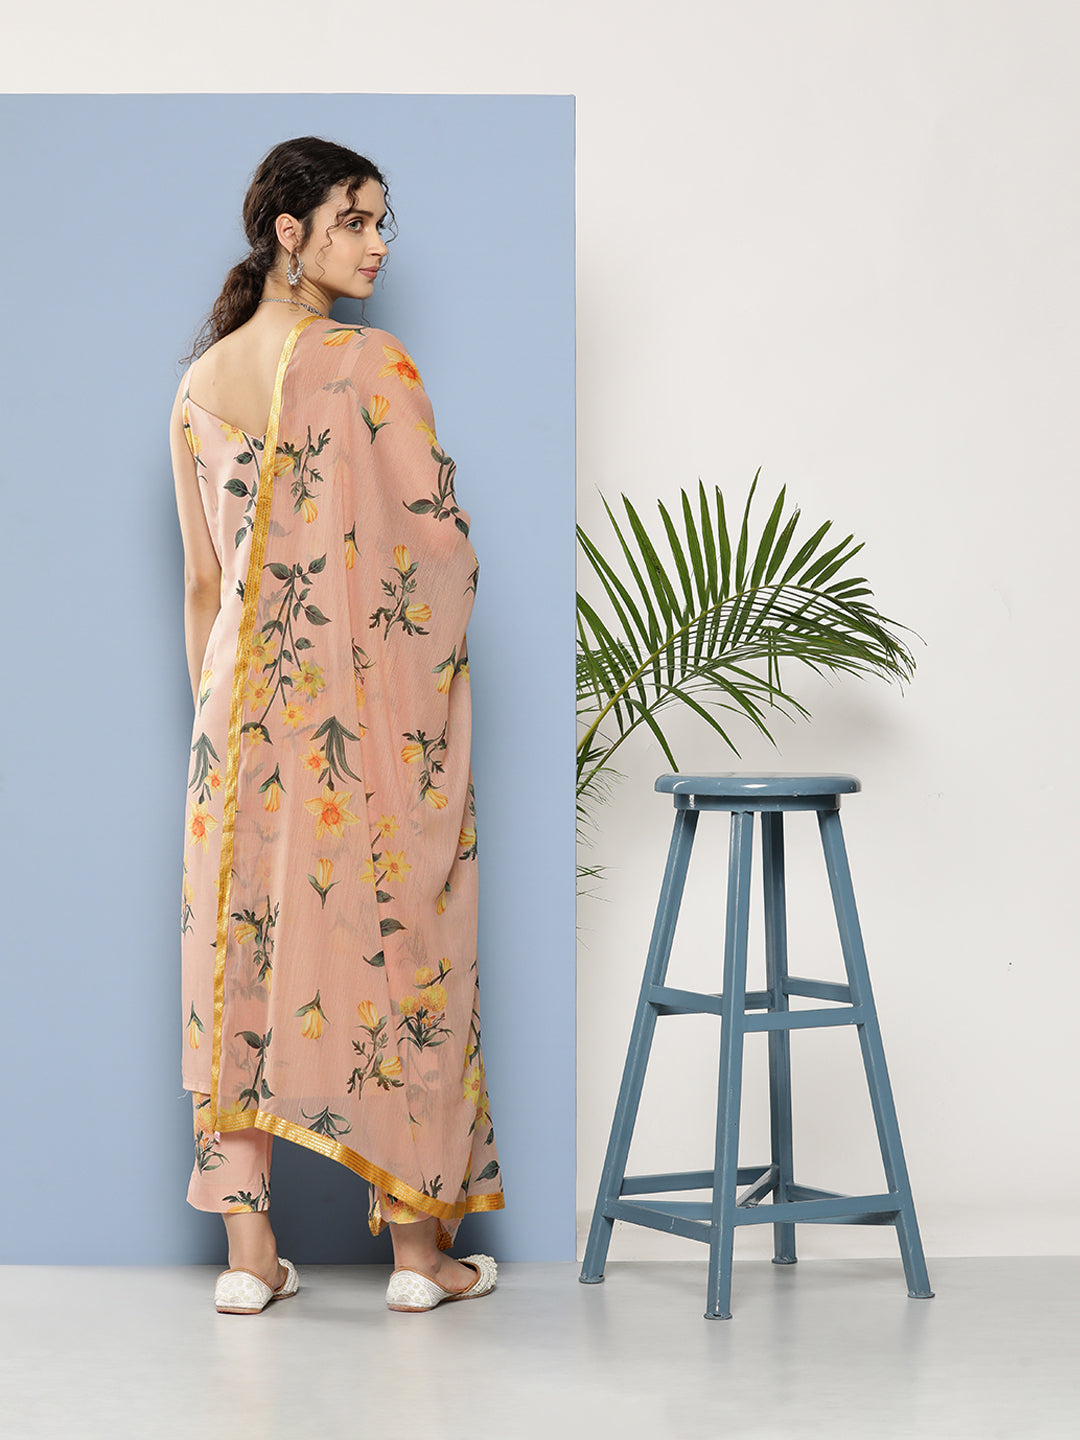 Nude-Coloured Floral Printed Gotta Patti Kurta with Trousers & With Dupatta